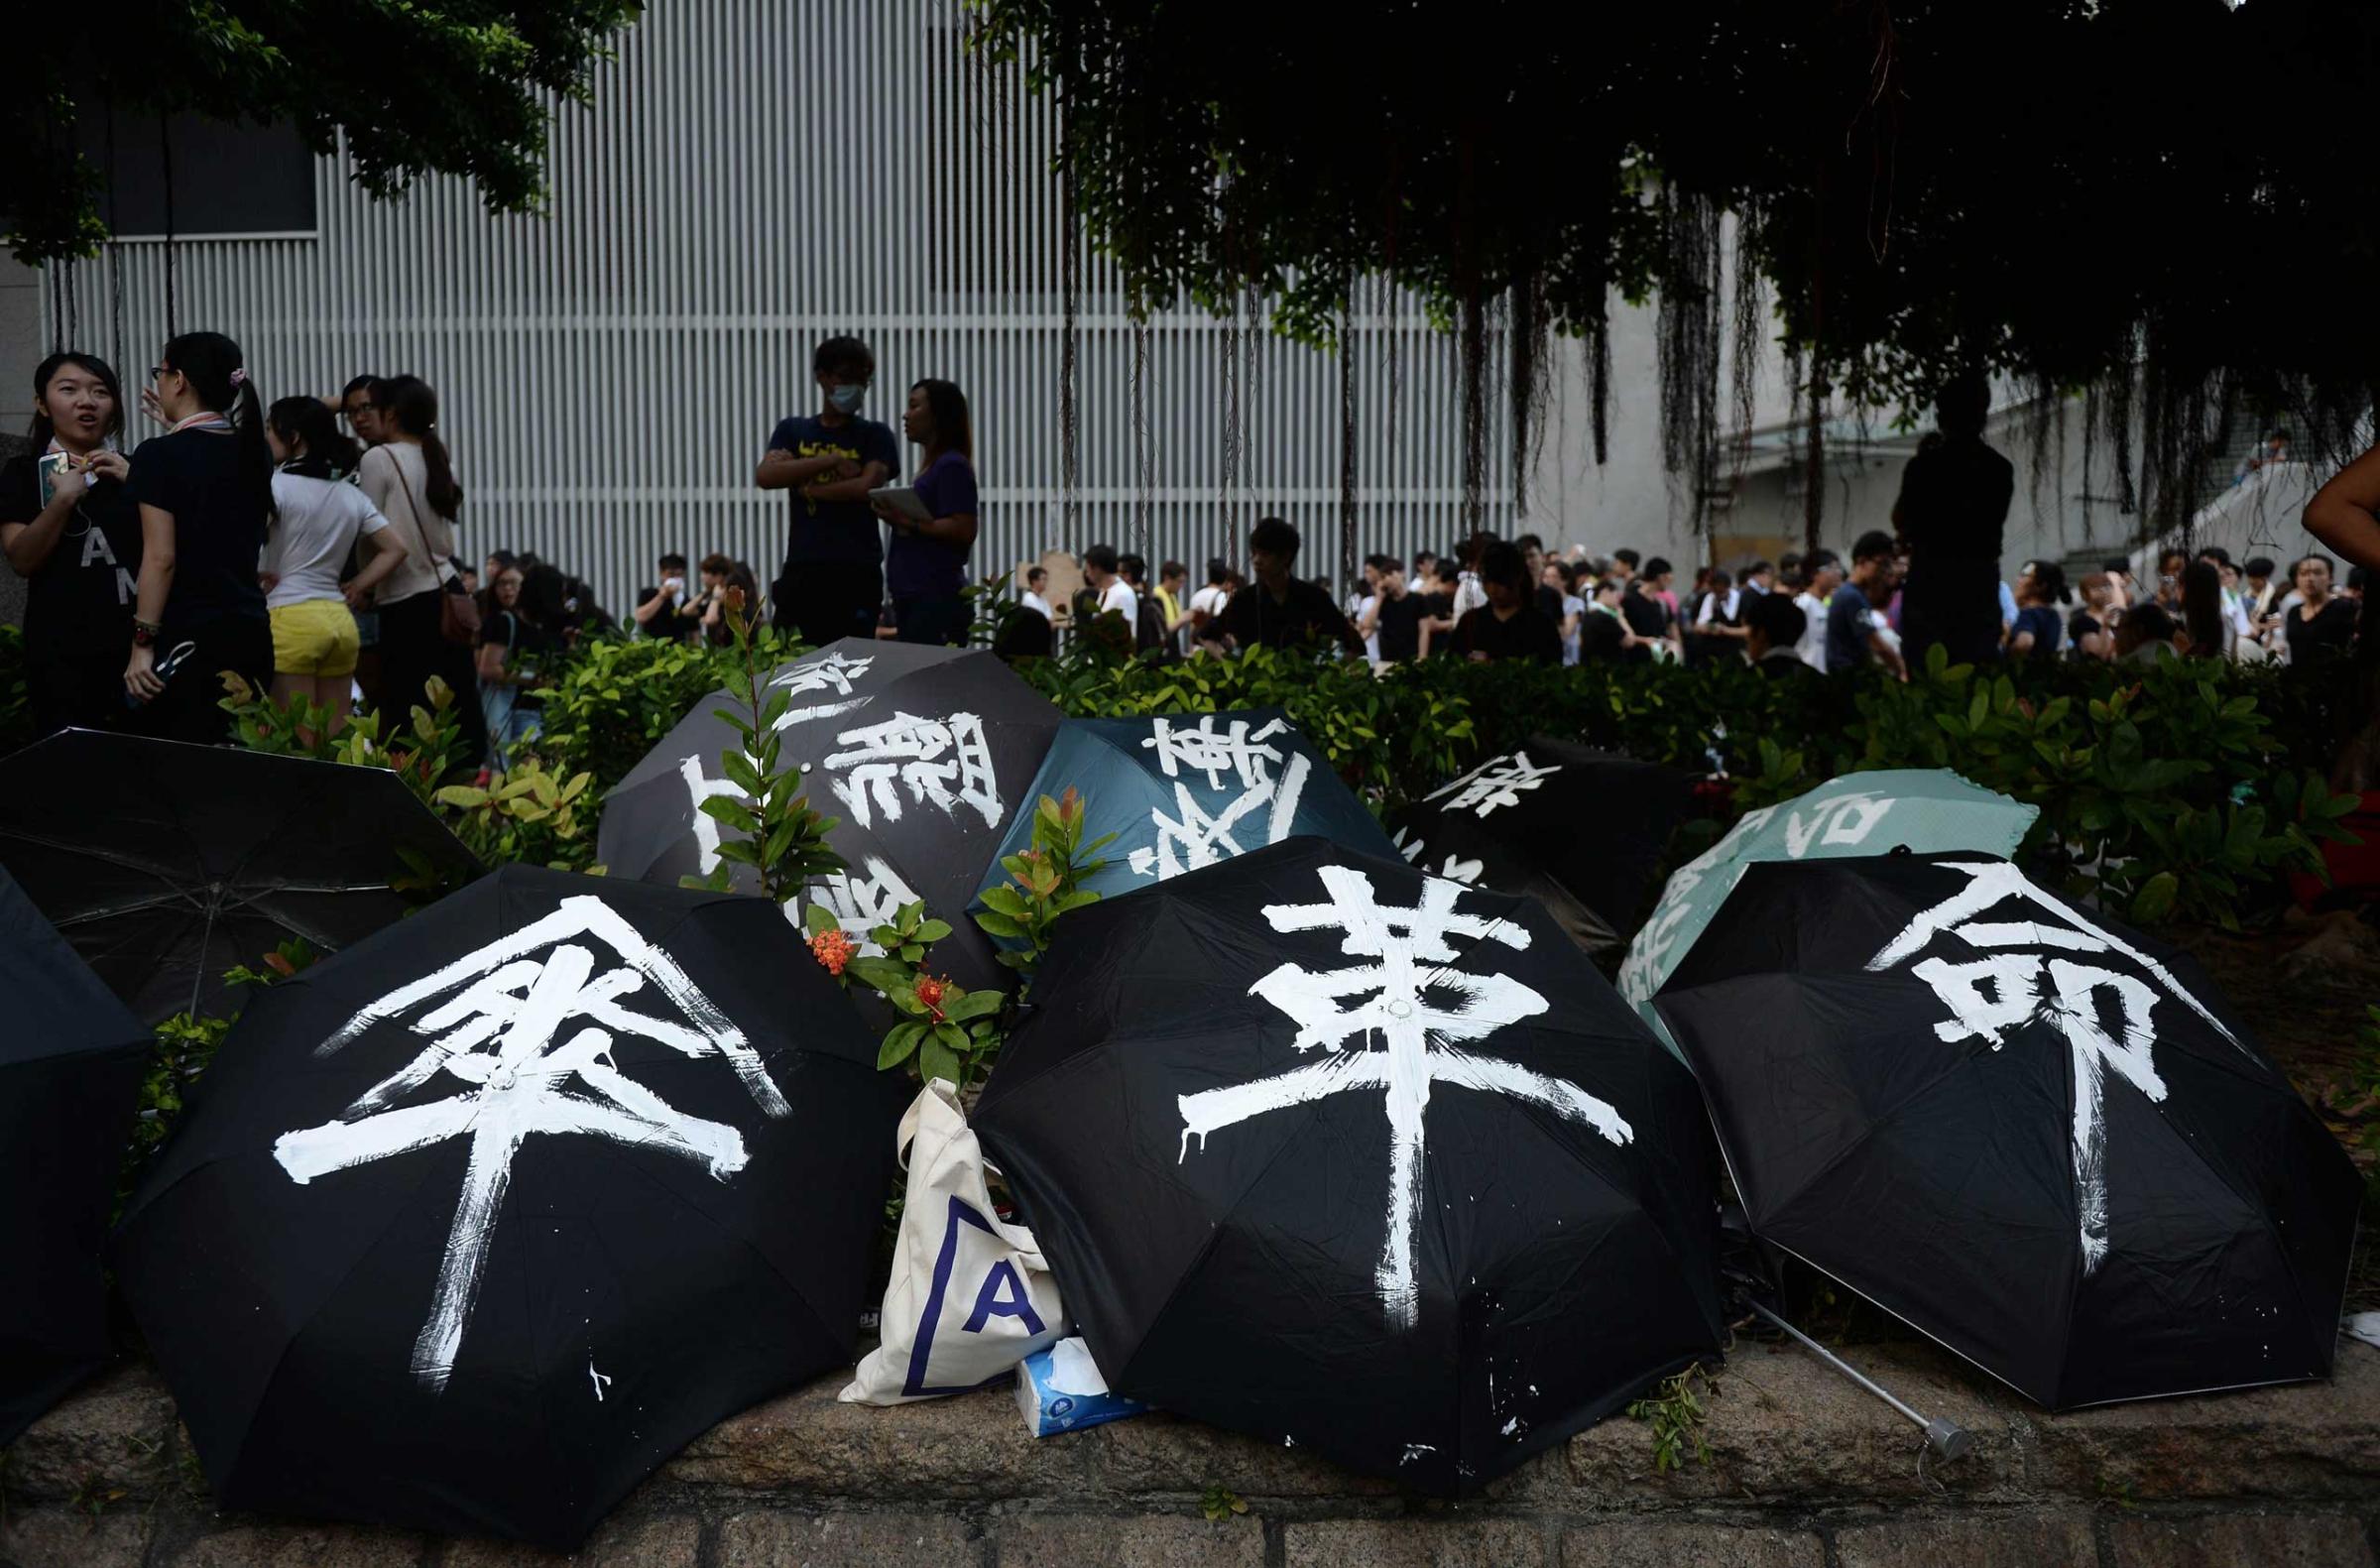 Umbrellas used to shield demonstrators from pepper spray and the sun are displayed during a pro-democracy protest near the Hong Kong government headquarters on Sept. 29, 2014.